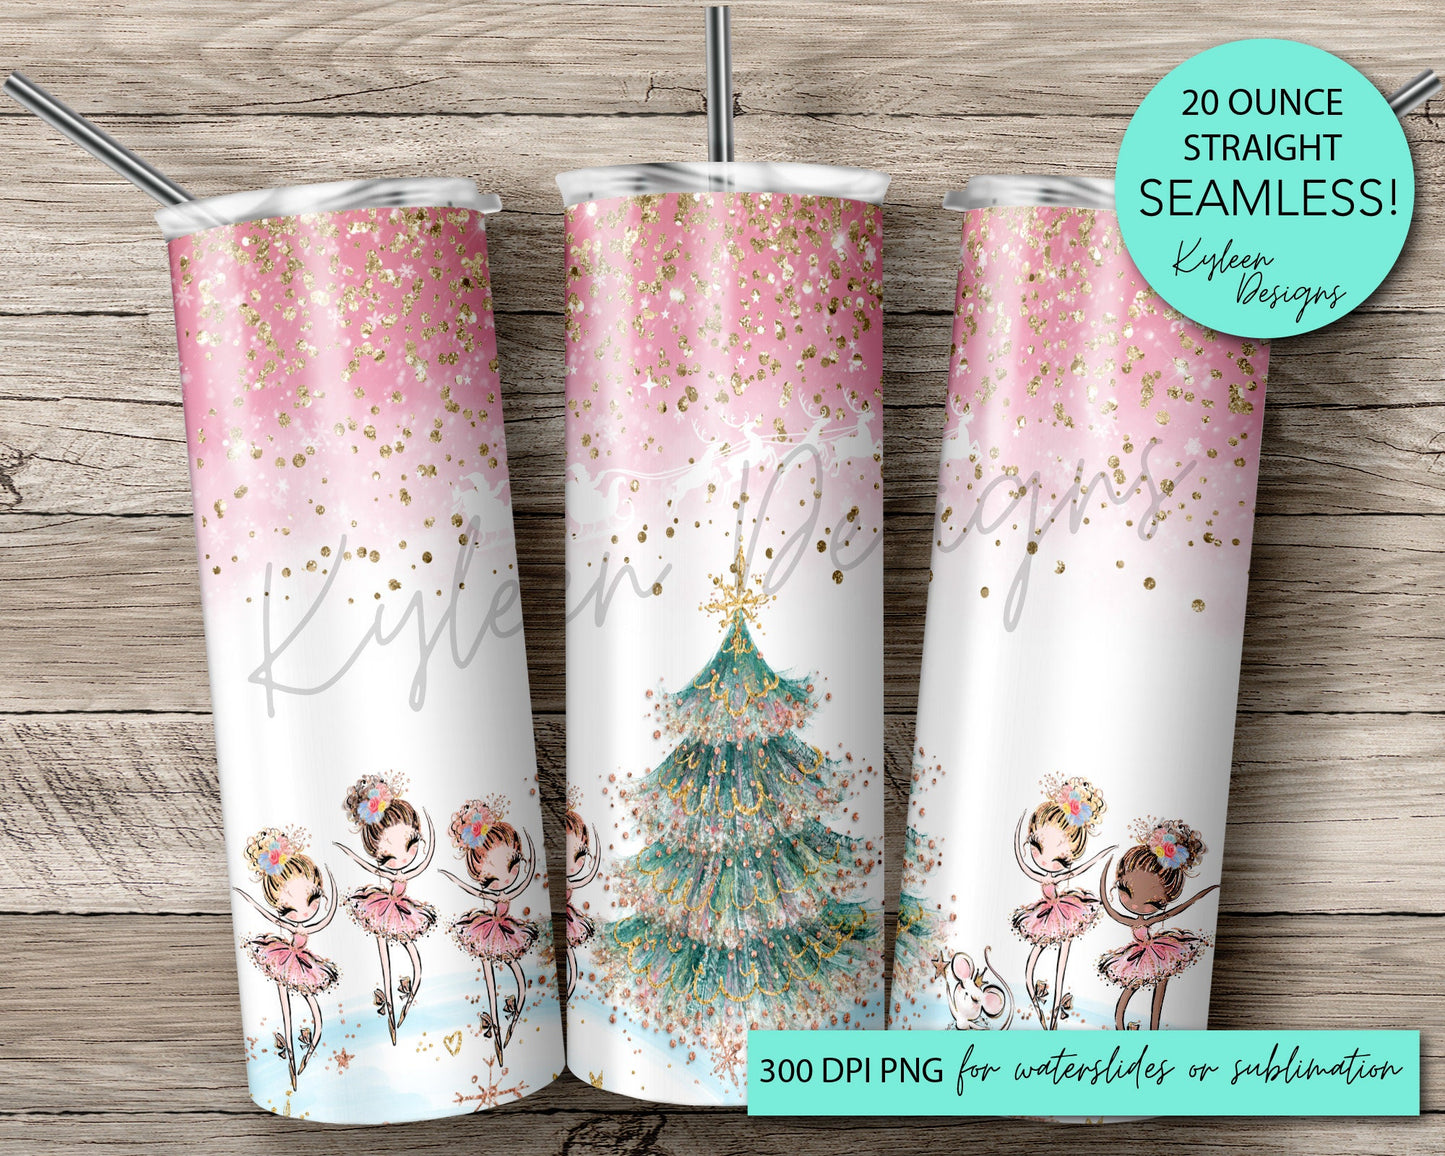 SEAMLESS 20 ounce nutcracker fairy tumbler wrap sublimation, waterslide High res PNG digital file- Straight only